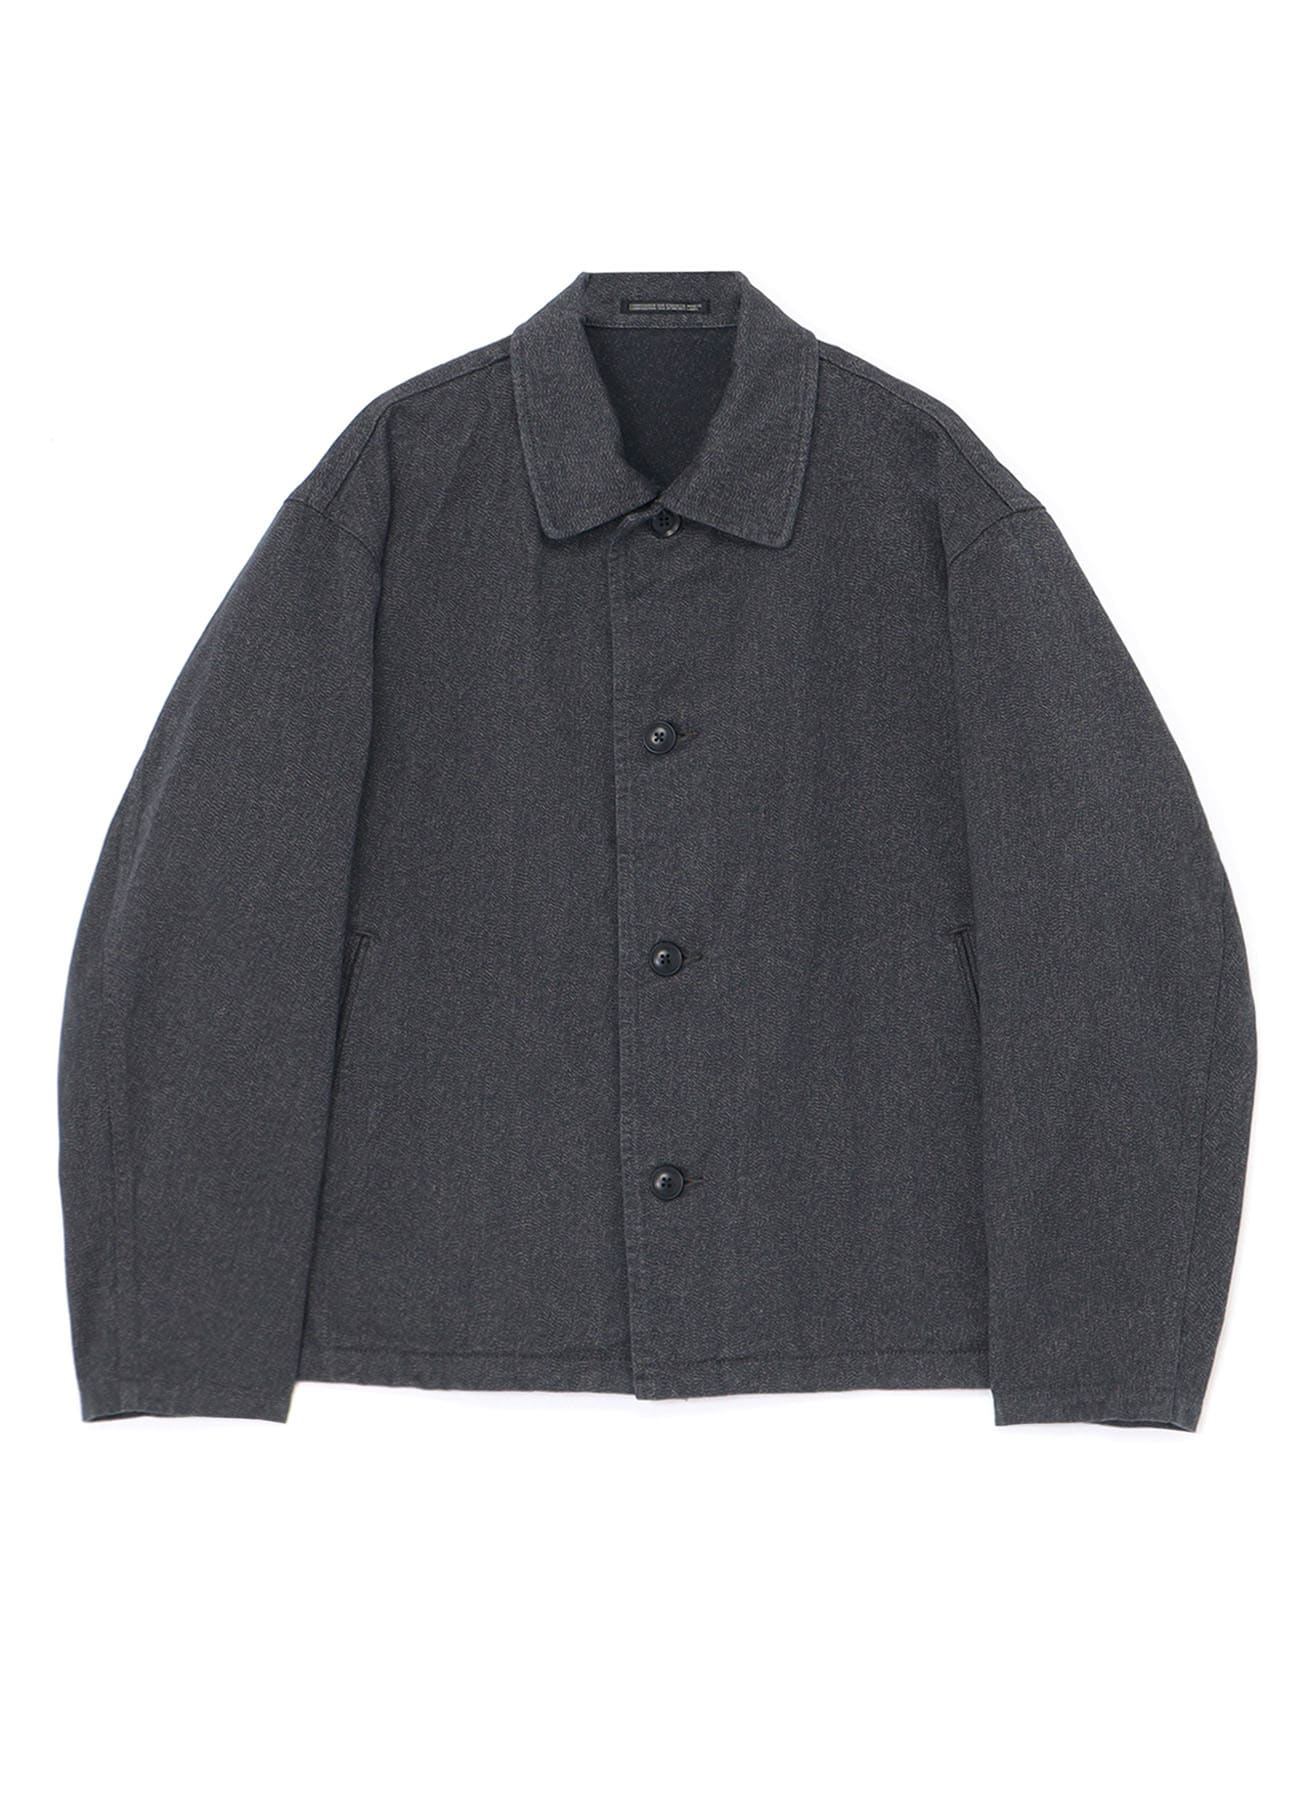 PIPING POCKET 4-BUTTON JACKET(S Light Grey): Vintage｜THE SHOP 